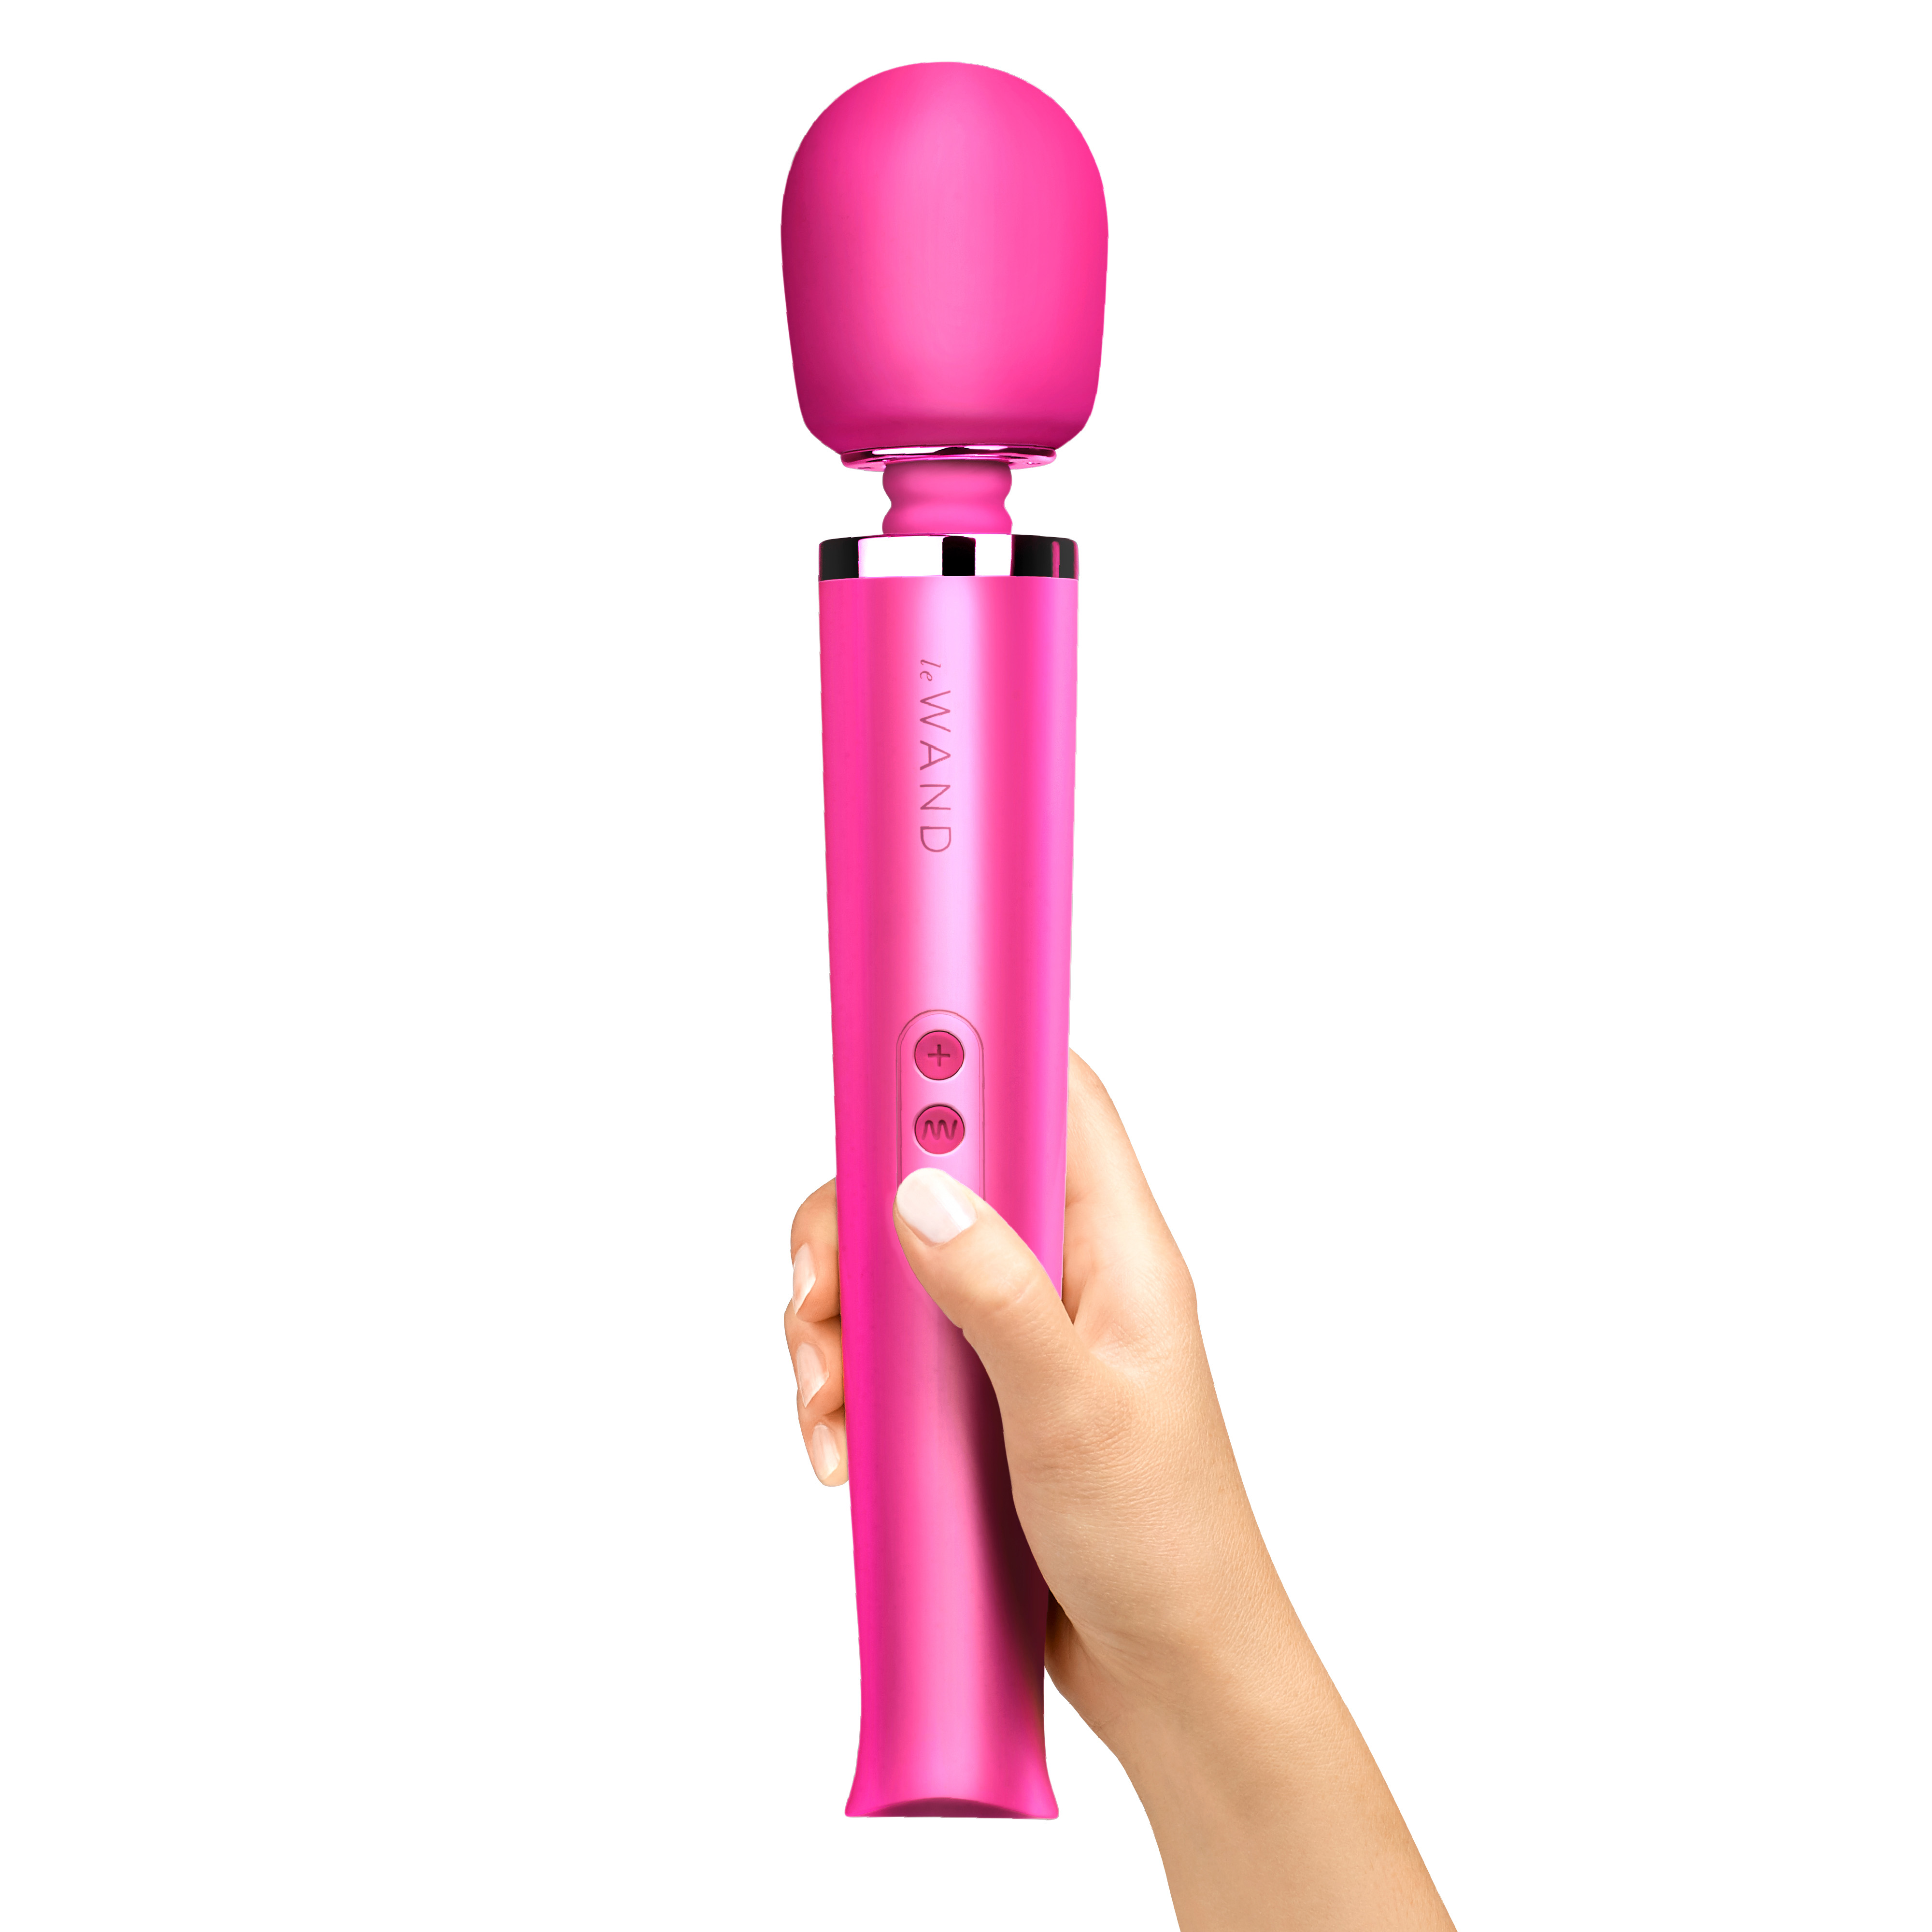 Le Wand Magenta rechargeable massager